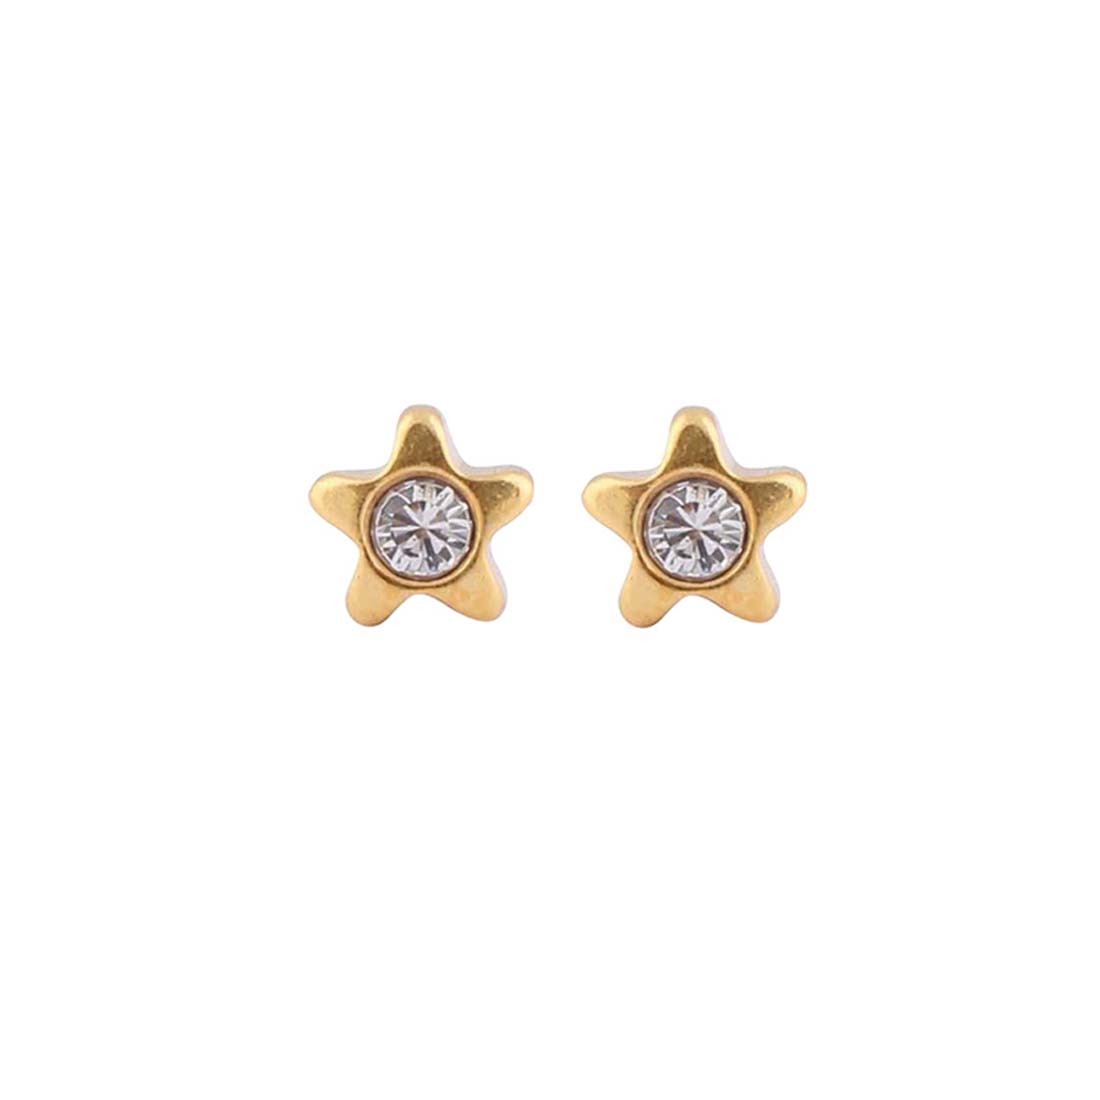 4MM - Starlite - April Crystal | 24K Gold Plated Kids / Baby / Children’s Fashion Earrings | Studex Tiny Tips